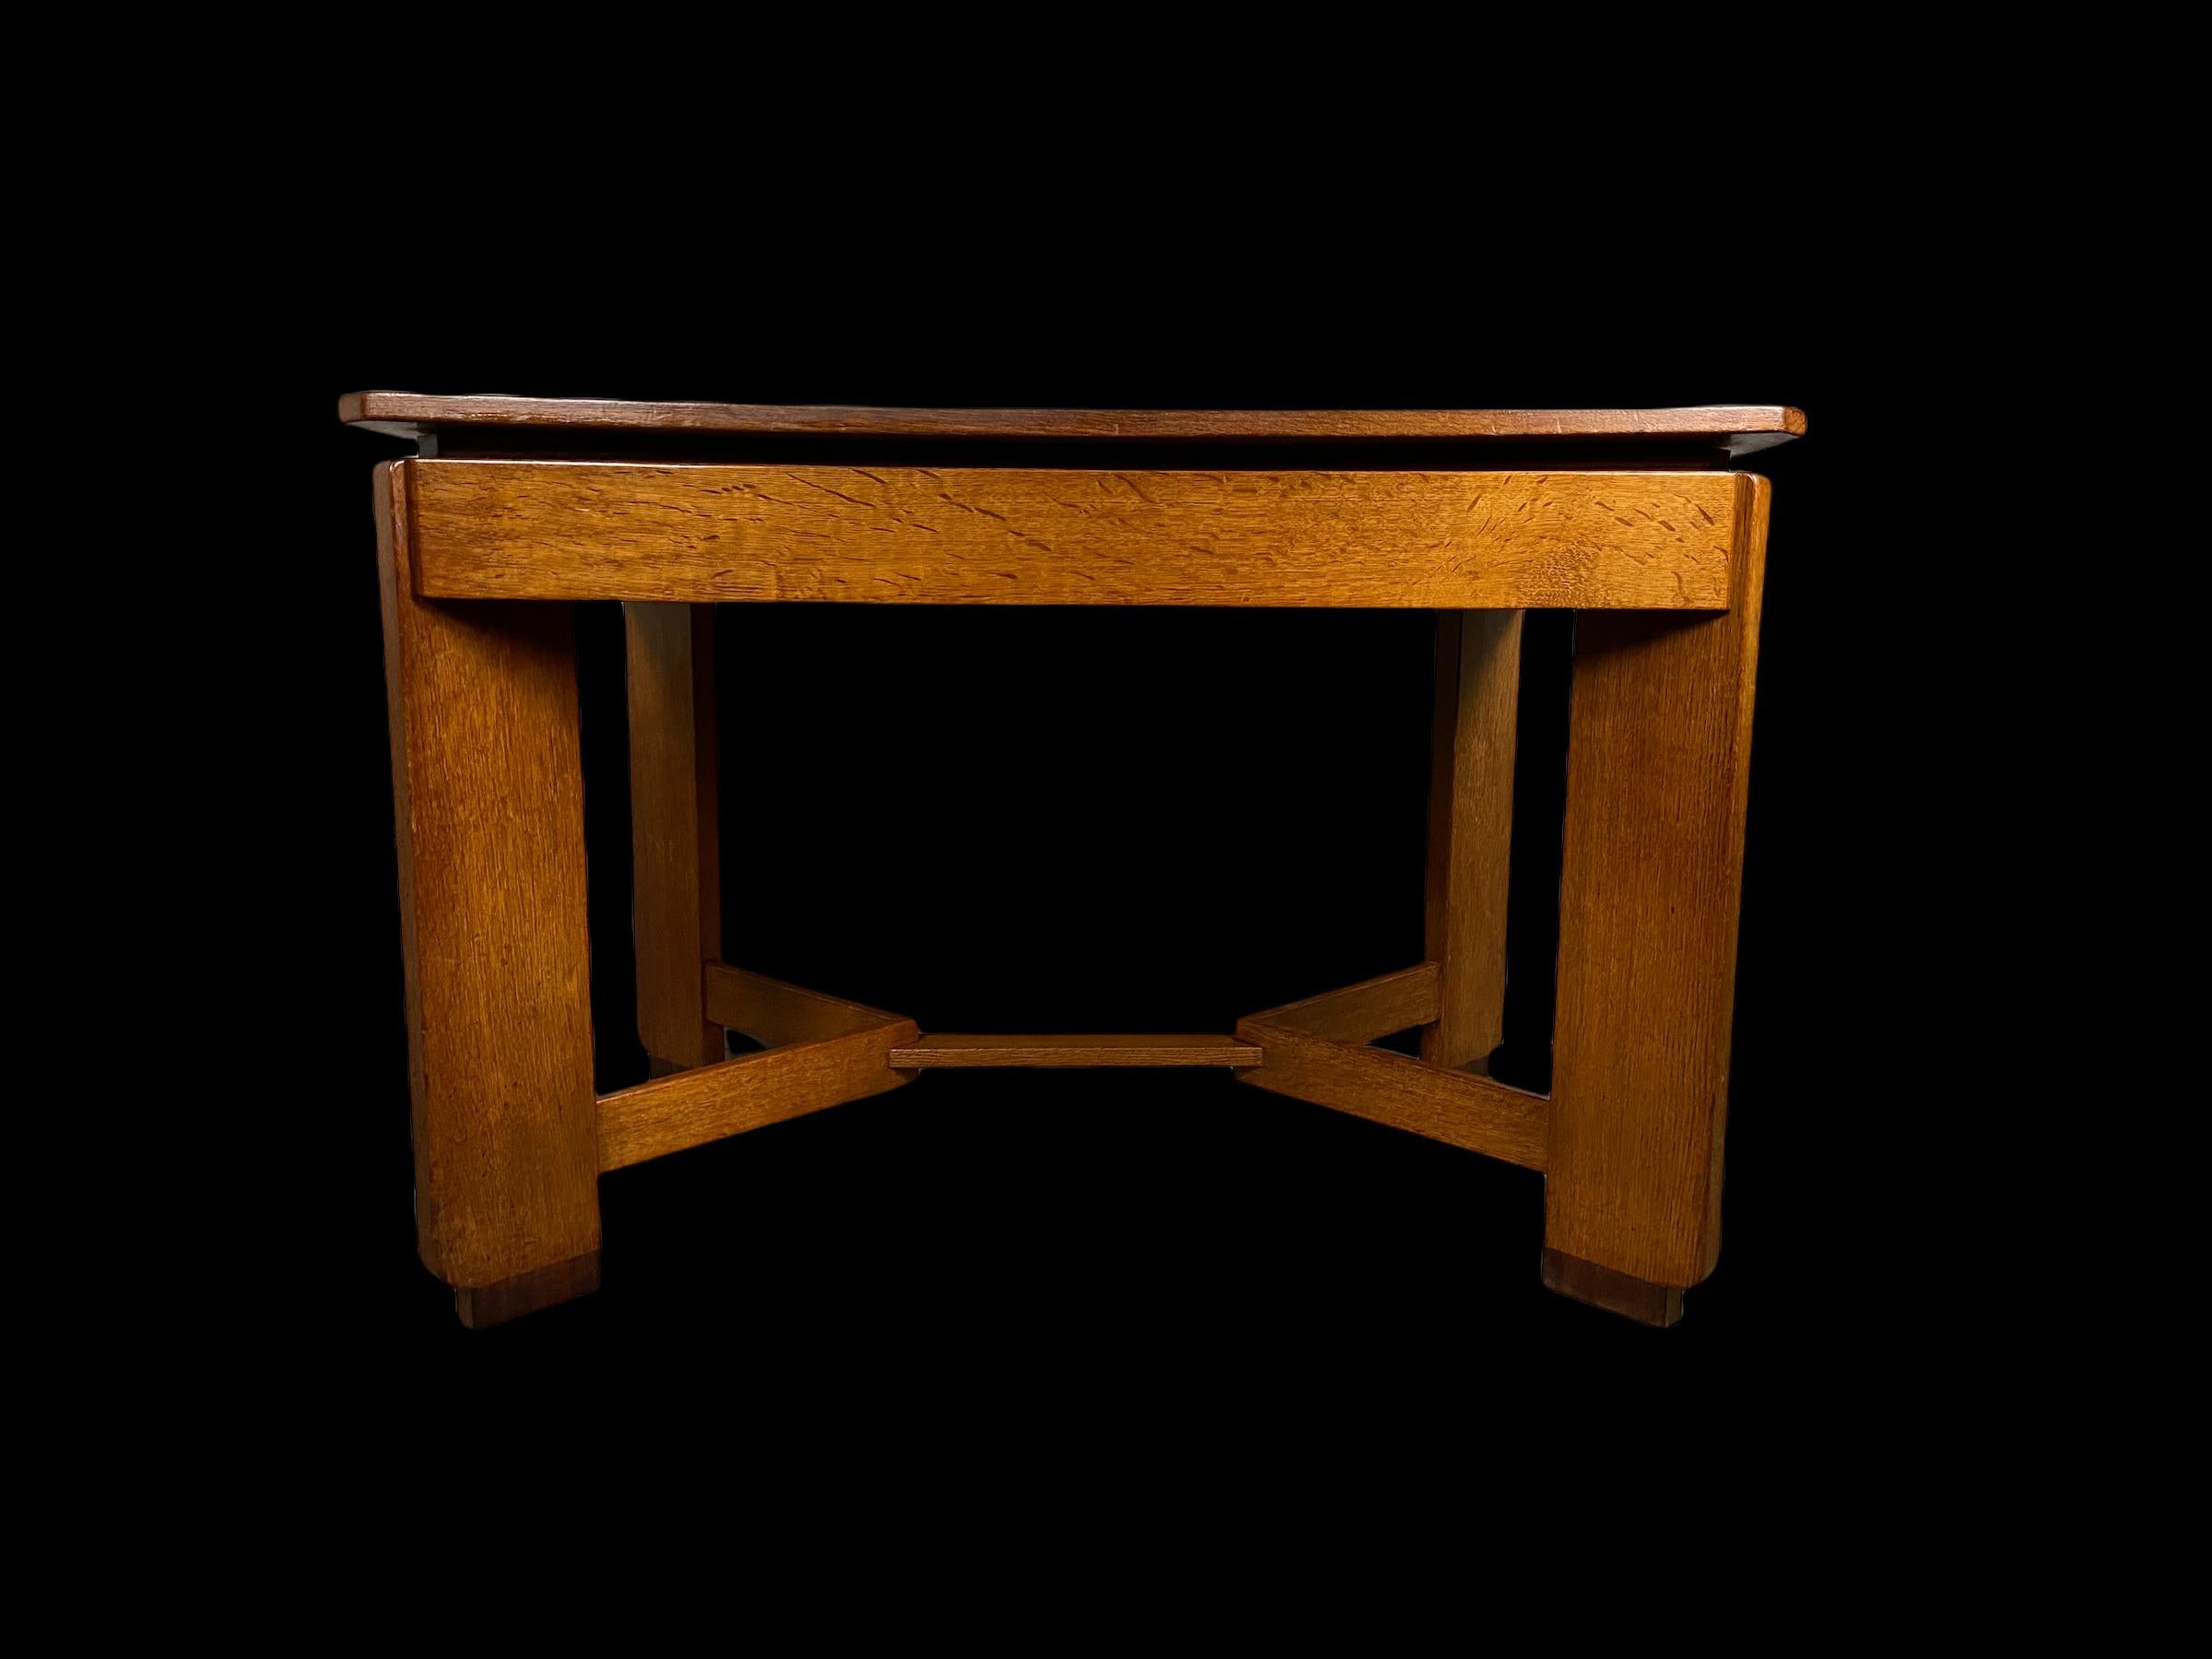 Amsterdam School dining table made of solid oak with under the top of the table a solid coromandel wooden edge. Made by H.Pander (1865-1985)This piece of Dutch design is in good condition but the table top is slightly warped as you can see on the